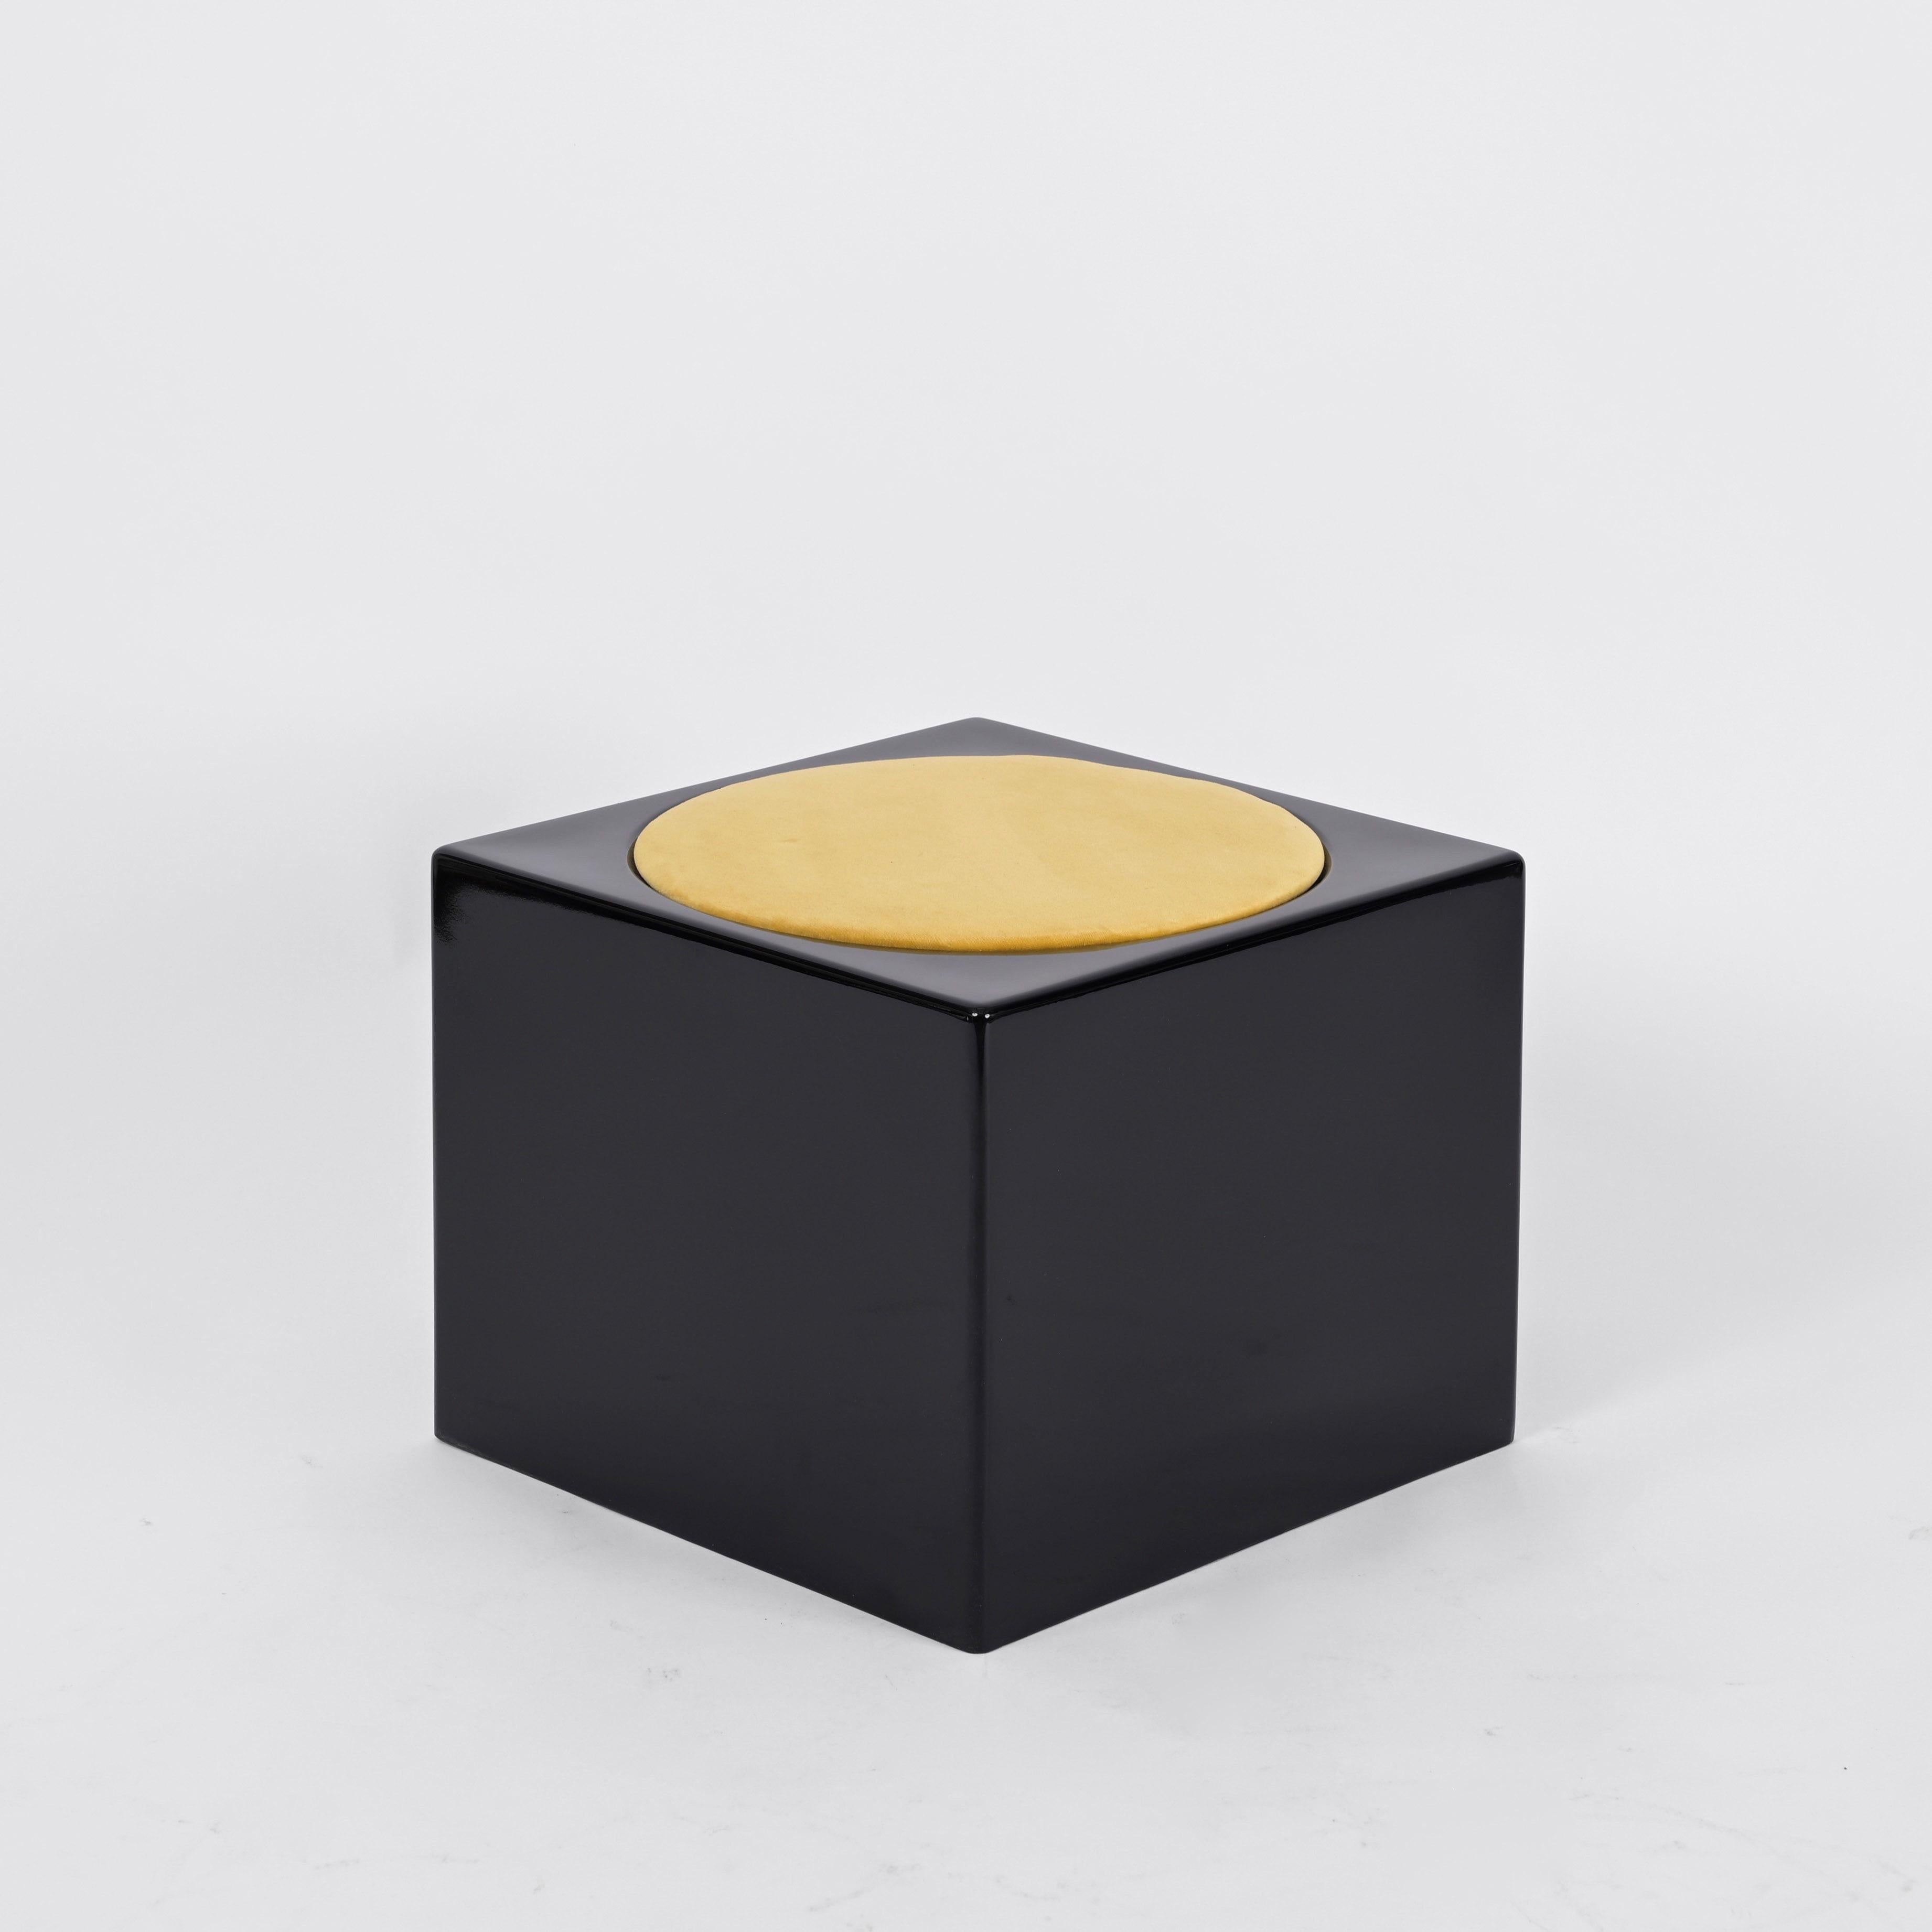 Hand-Crafted Mid-Century 'Il Kubile' Cubic Stool, by Pellegrini for MIM Roma, Italy, 1970s For Sale